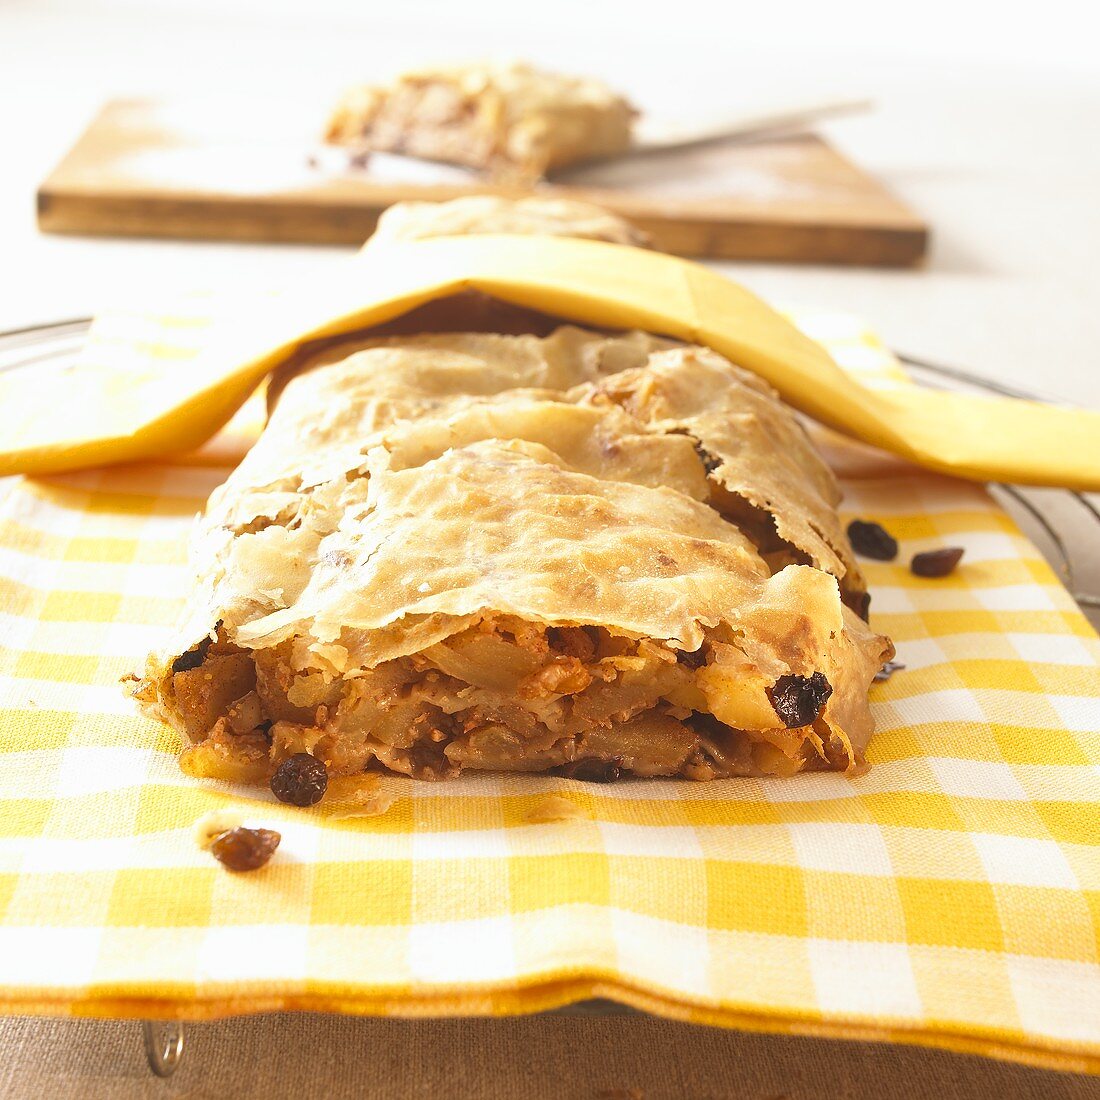 Apple strudel on checked cloth